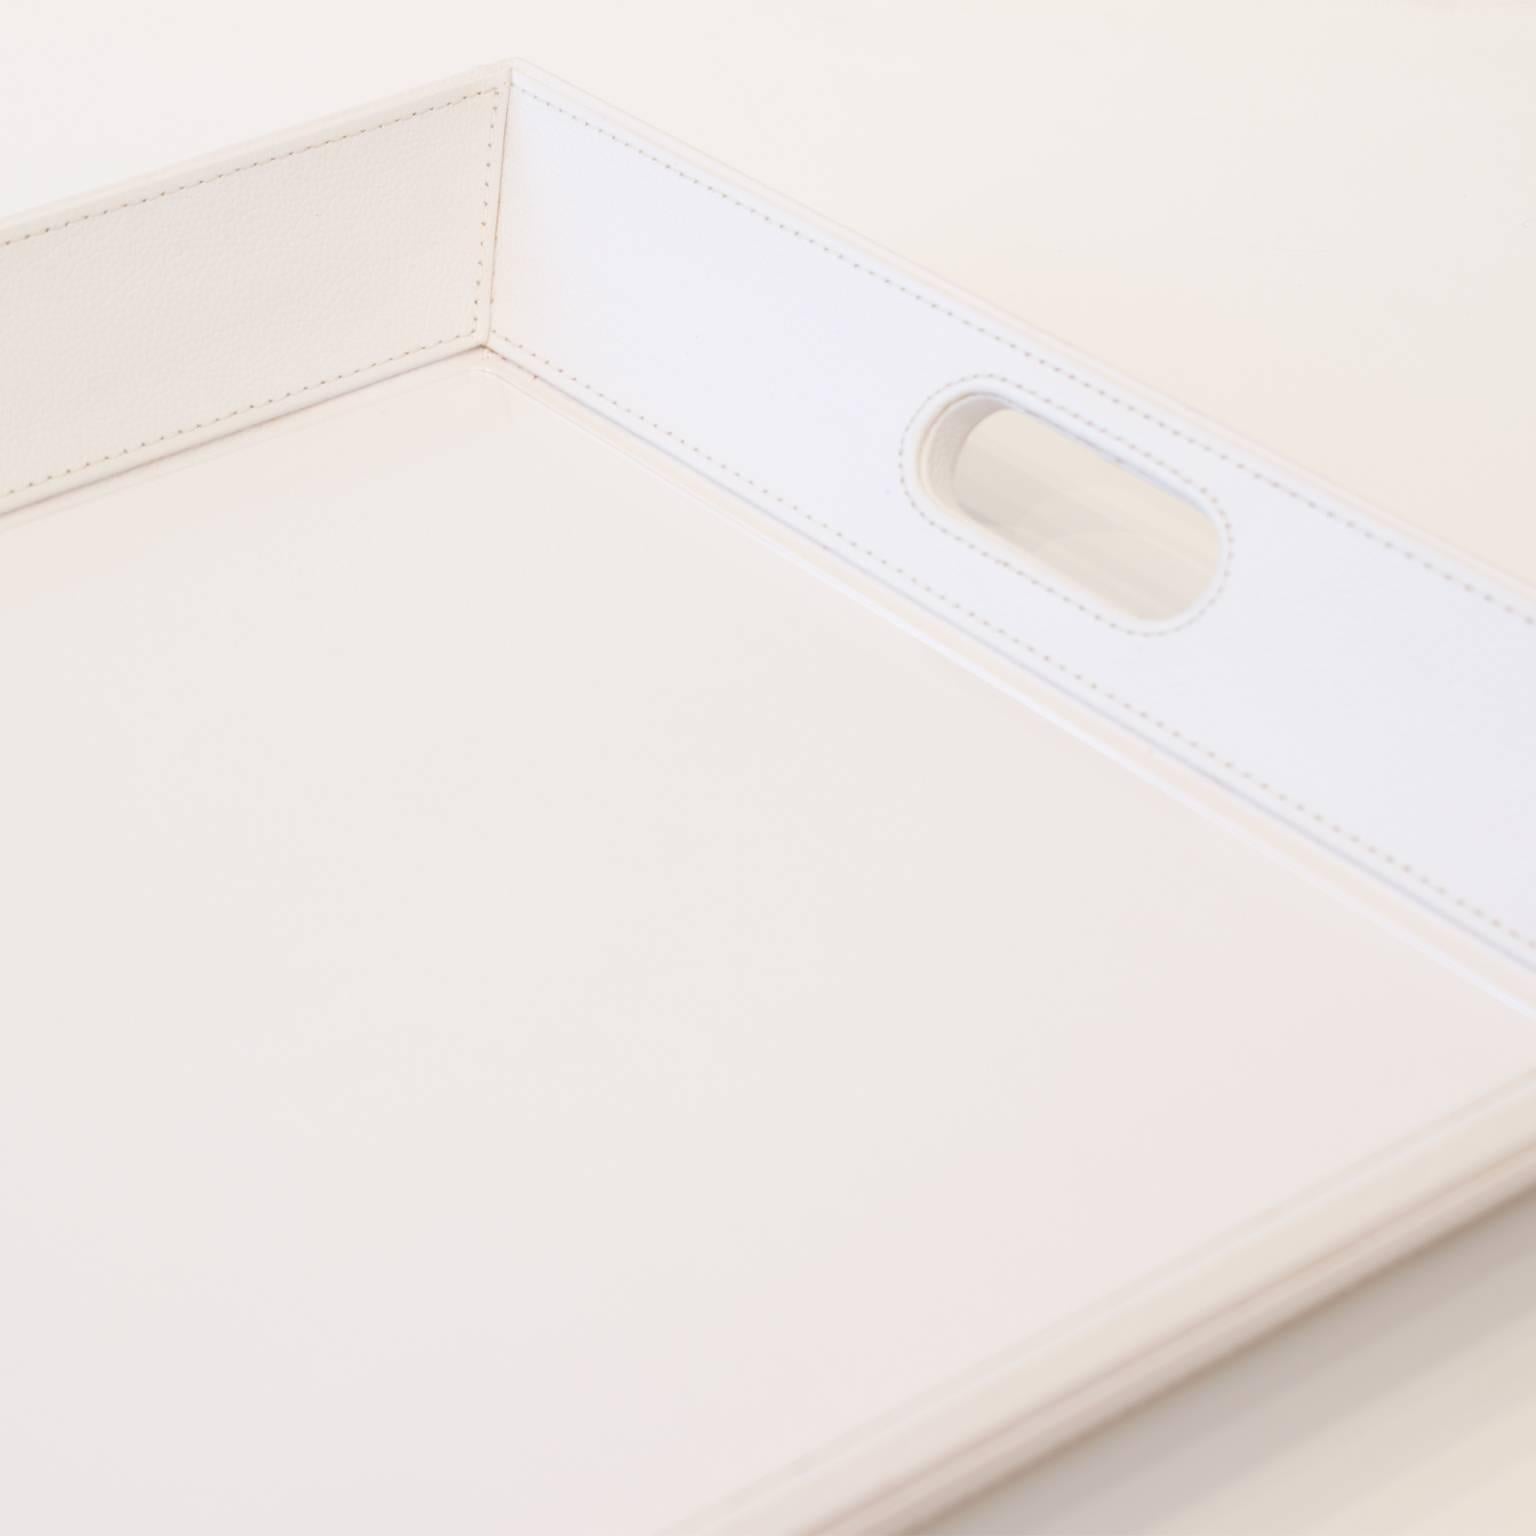 Exceptional hand-stitched white leather tray from Platas Lappas. Tray comes with removable acrylic inset.